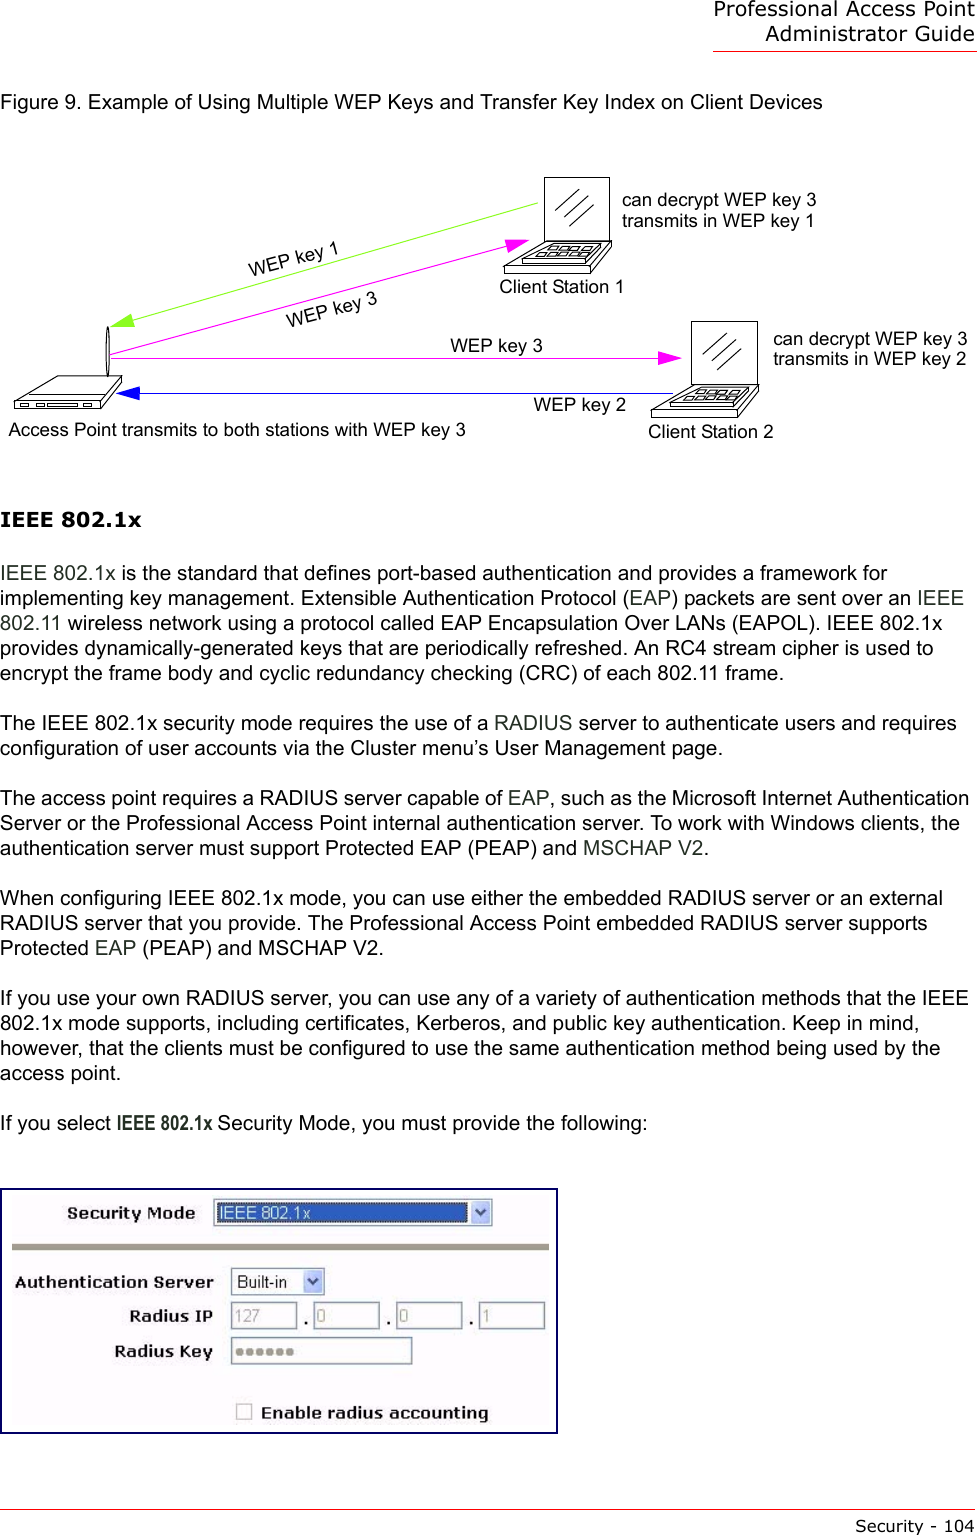 Professional Access Point Administrator GuideSecurity - 104Figure 9. Example of Using Multiple WEP Keys and Transfer Key Index on Client DevicesIEEE 802.1xIEEE 802.1x is the standard that defines port-based authentication and provides a framework for implementing key management. Extensible Authentication Protocol (EAP) packets are sent over an IEEE 802.11 wireless network using a protocol called EAP Encapsulation Over LANs (EAPOL). IEEE 802.1x provides dynamically-generated keys that are periodically refreshed. An RC4 stream cipher is used to encrypt the frame body and cyclic redundancy checking (CRC) of each 802.11 frame.The IEEE 802.1x security mode requires the use of a RADIUS server to authenticate users and requires configuration of user accounts via the Cluster menu’s User Management page.The access point requires a RADIUS server capable of EAP, such as the Microsoft Internet Authentication Server or the Professional Access Point internal authentication server. To work with Windows clients, the authentication server must support Protected EAP (PEAP) and MSCHAP V2.When configuring IEEE 802.1x mode, you can use either the embedded RADIUS server or an external RADIUS server that you provide. The Professional Access Point embedded RADIUS server supports Protected EAP (PEAP) and MSCHAP V2.If you use your own RADIUS server, you can use any of a variety of authentication methods that the IEEE 802.1x mode supports, including certificates, Kerberos, and public key authentication. Keep in mind, however, that the clients must be configured to use the same authentication method being used by the access point. If you select IEEE 802.1x Security Mode, you must provide the following:Access Point transmits to both stations with WEP key 3Client Station 1Client Station 2WEP key 3WEP key 3WEP key 2WEP key 1can decrypt WEP key 3transmits in WEP key 1can decrypt WEP key 3transmits in WEP key 2